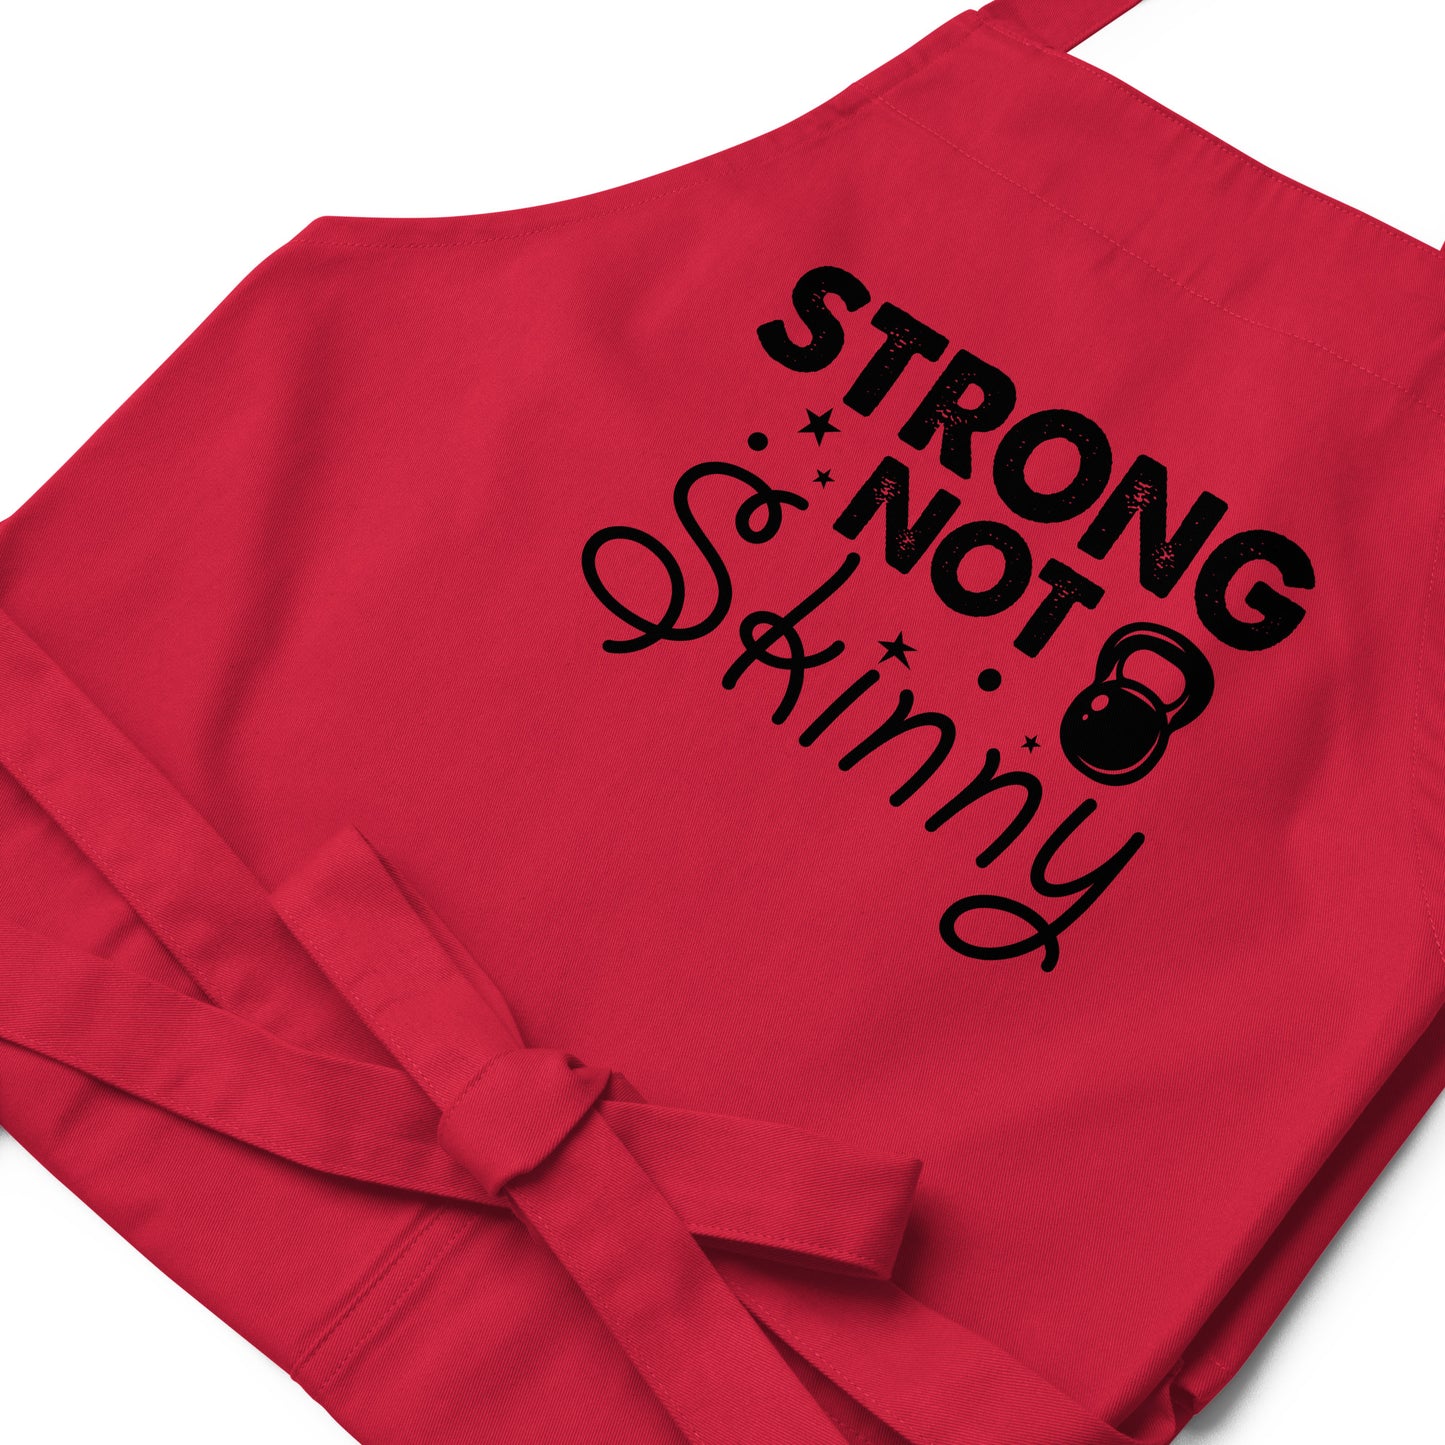 Strong Not Skinny Organic cotton apron